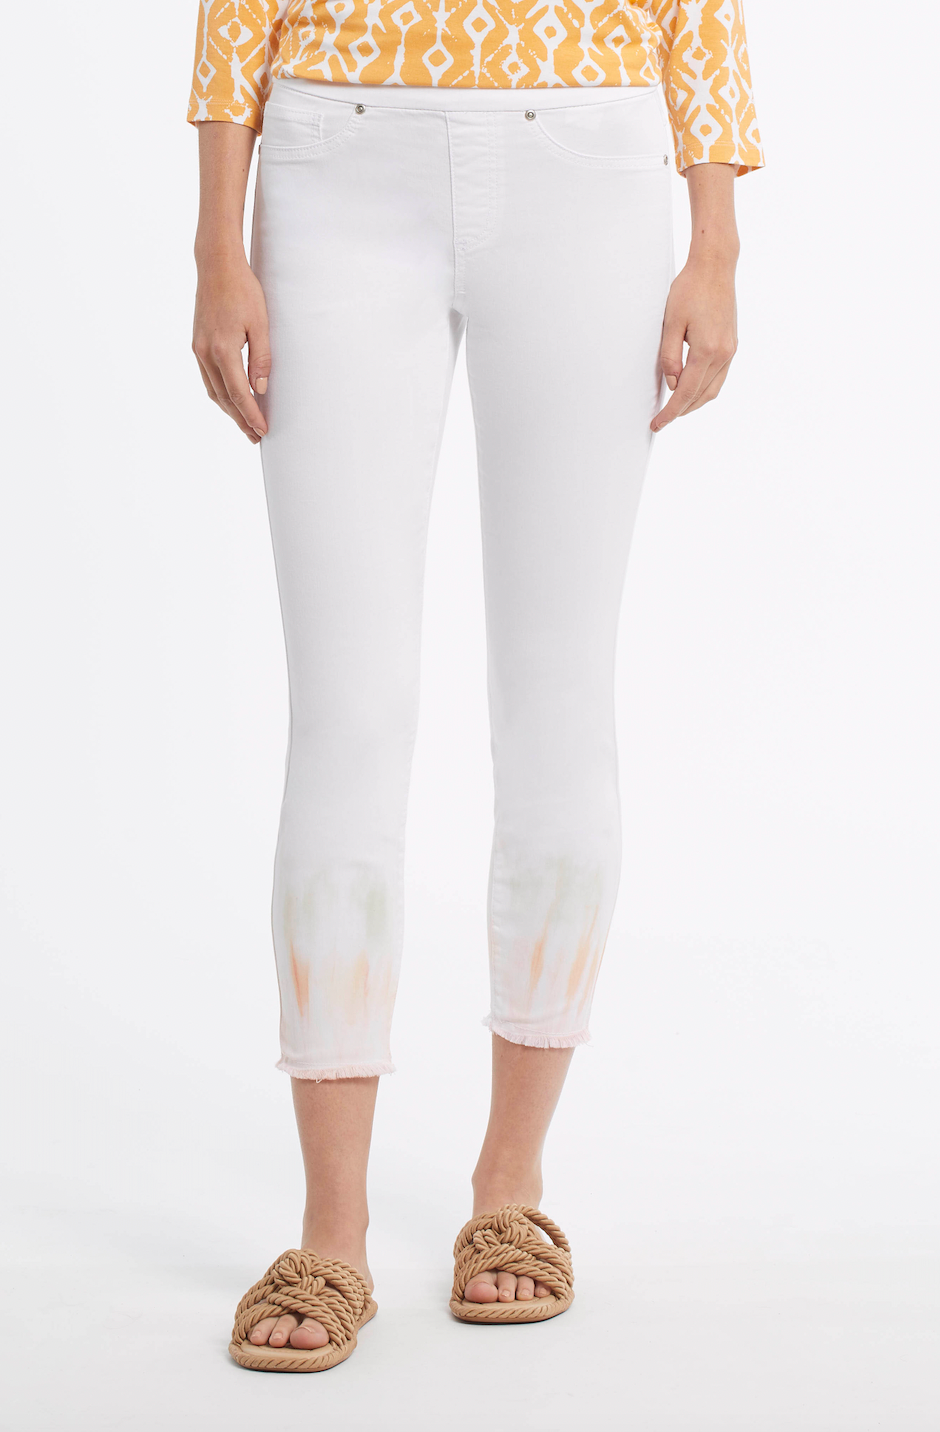 Tribal Audrey Pull On Crop Jegging